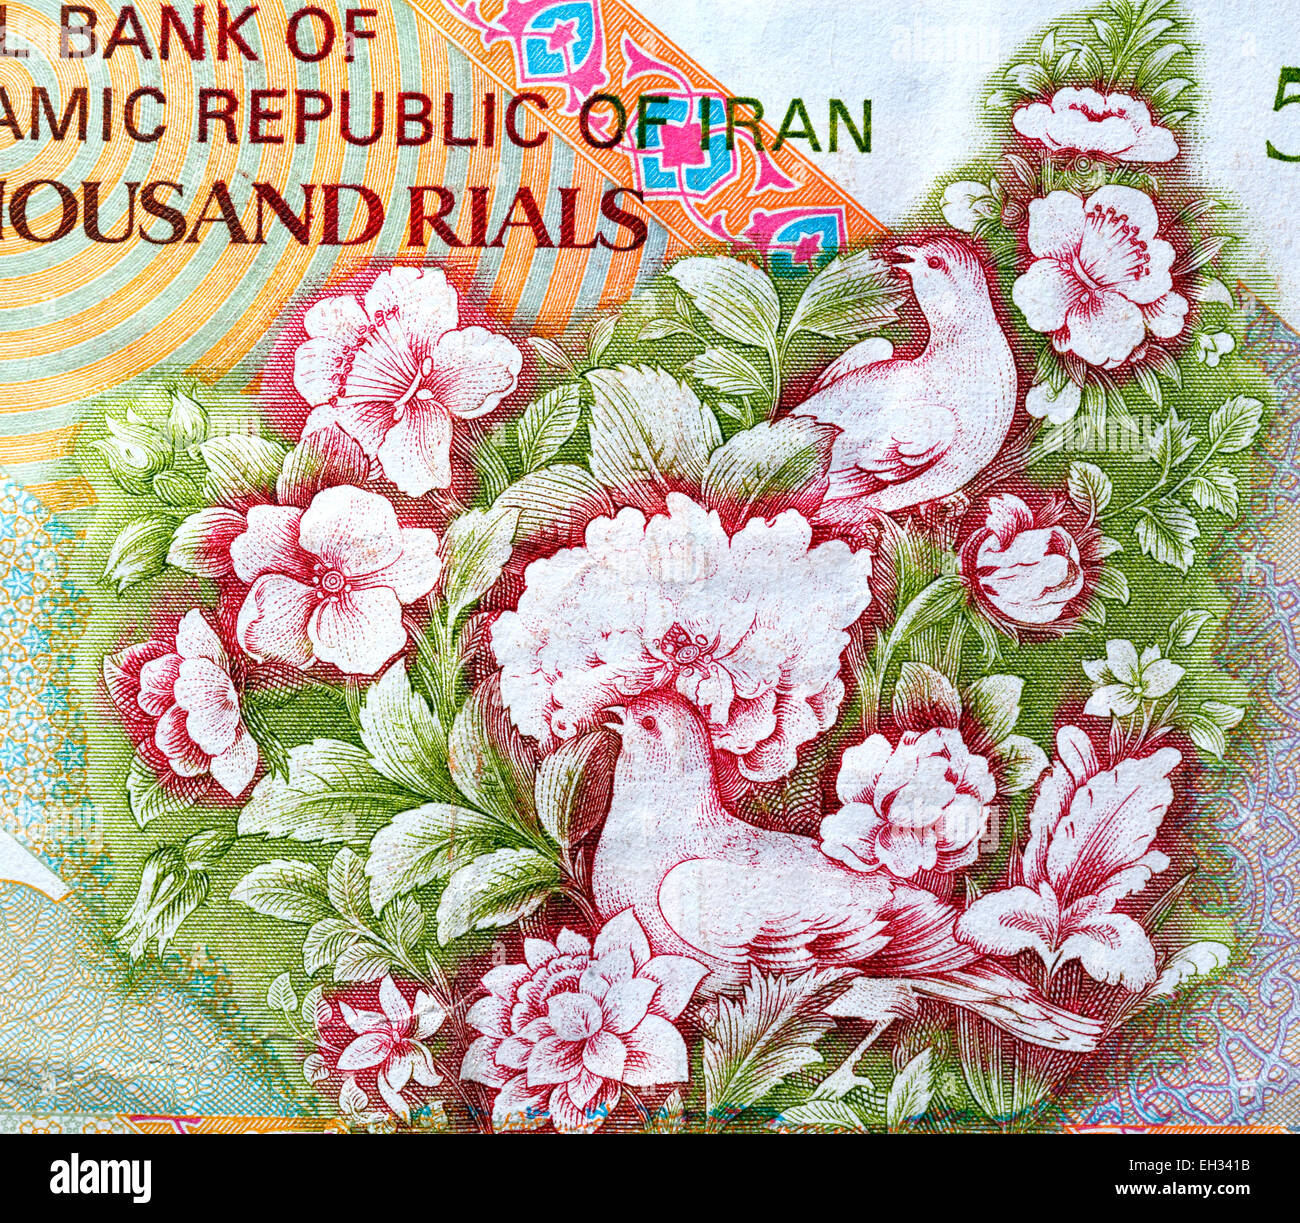 Ornate floral design from 5000 rials banknote, Iran, 1993 Stock Photo